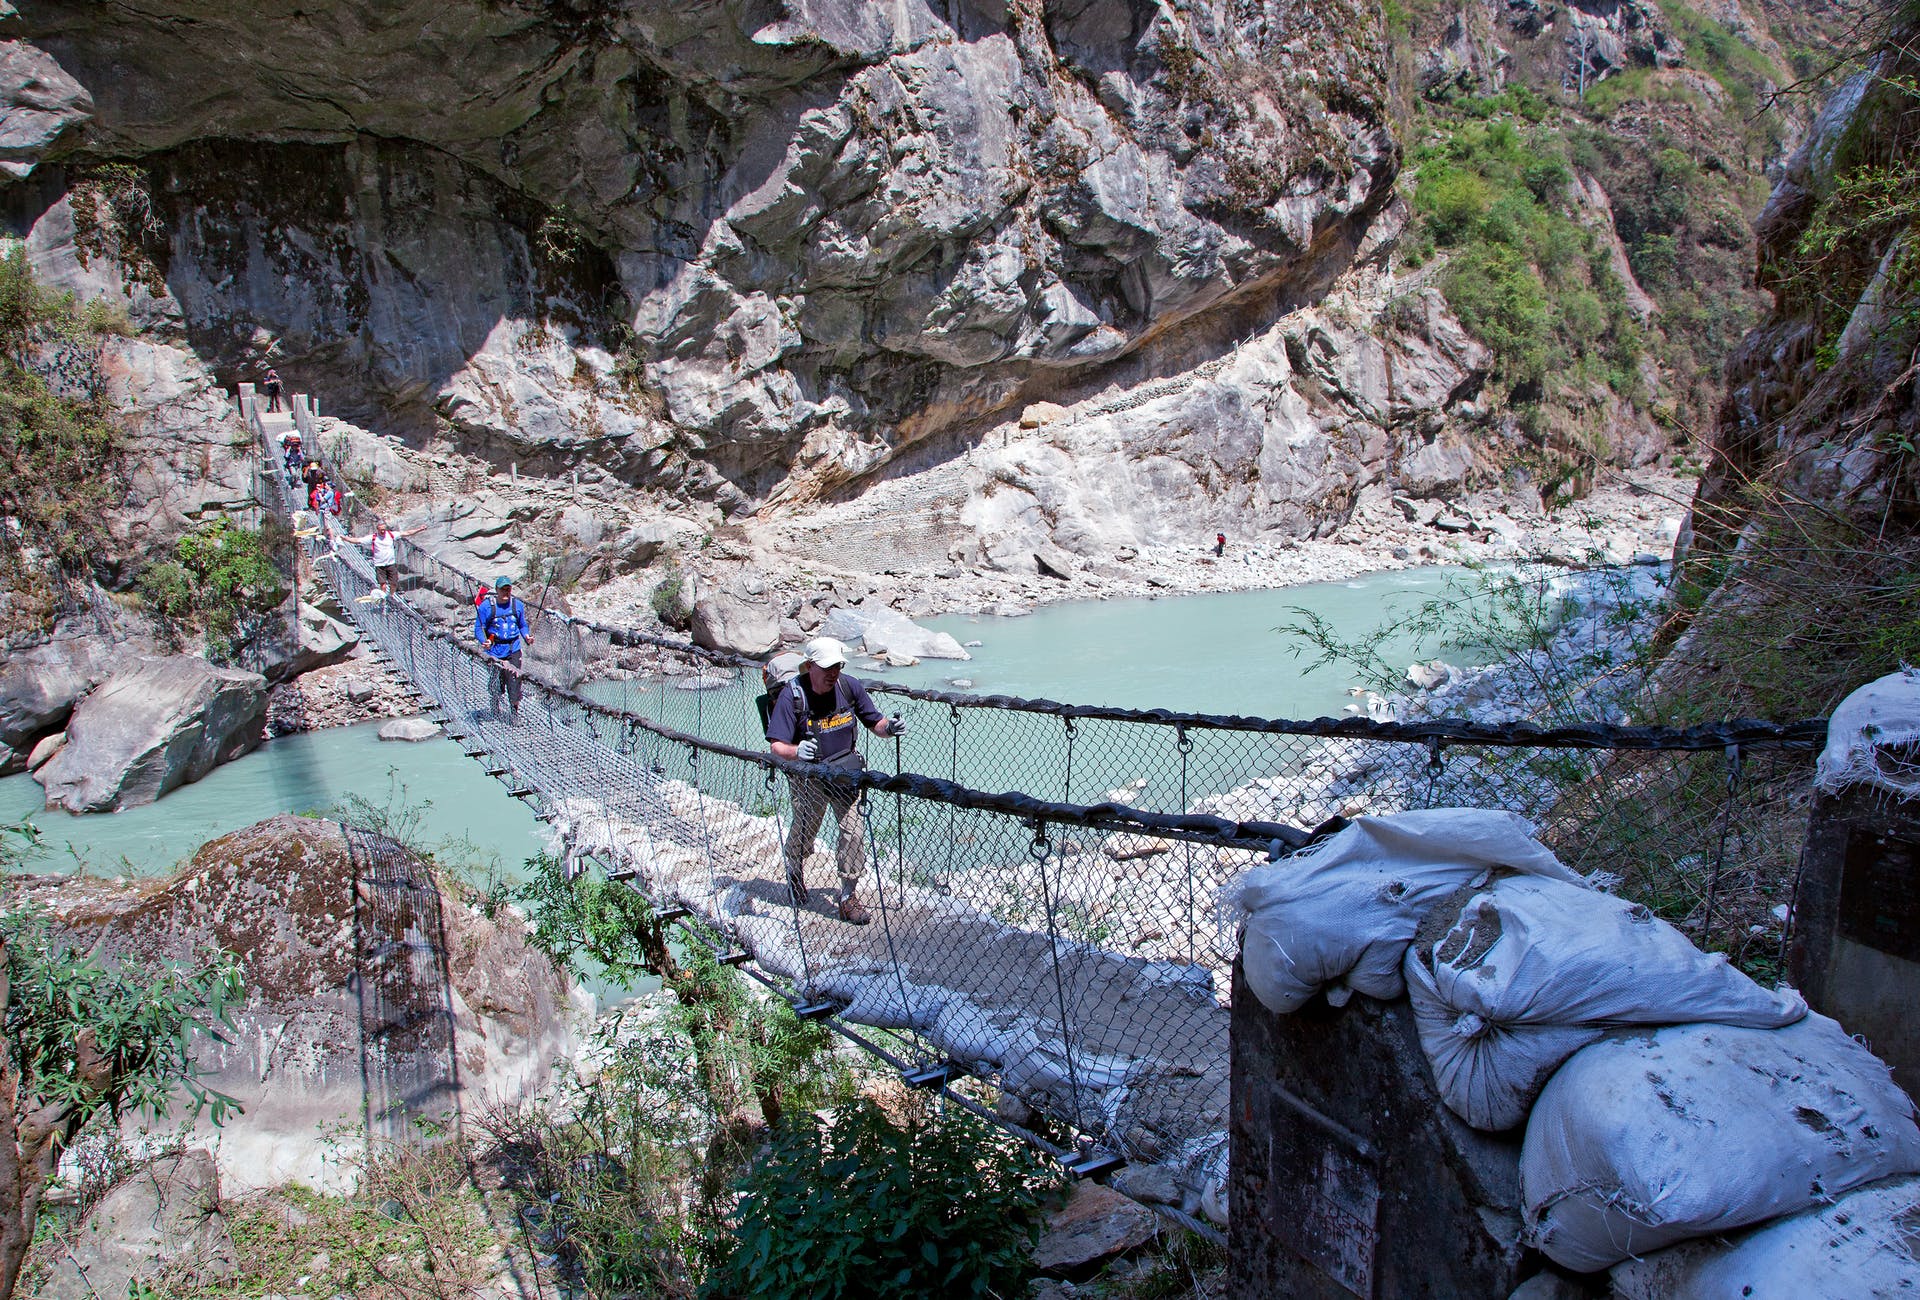 A group of hikers make their way over a suspension bridge in Nepal.